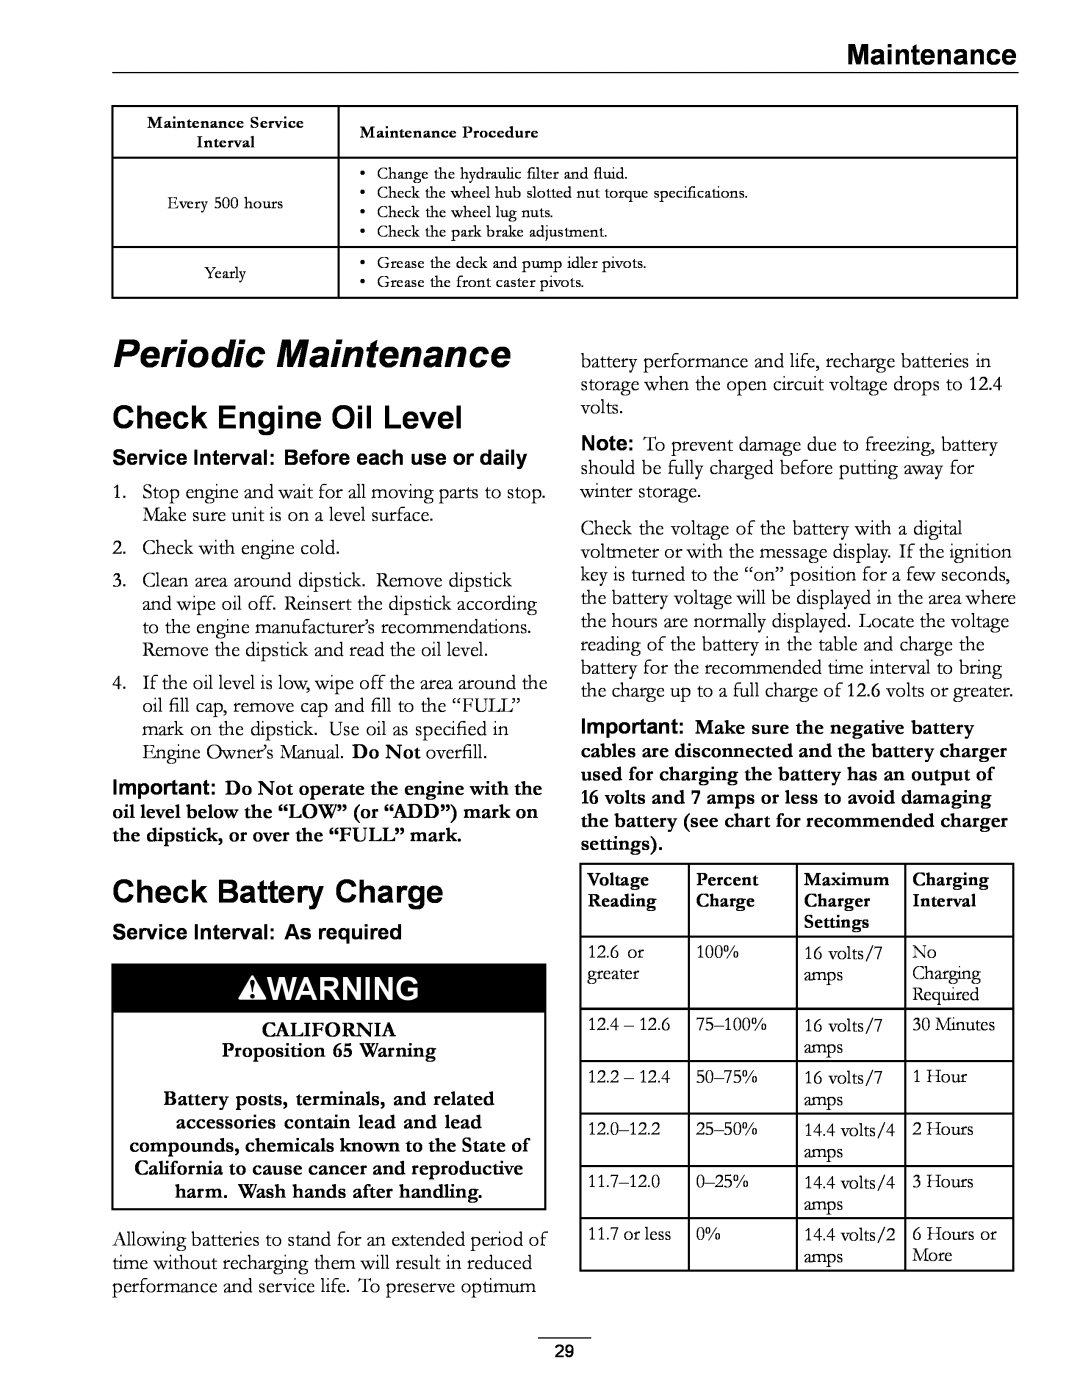 Exmark S/N 790, 4500-471 Periodic Maintenance, Check Engine Oil Level, Check Battery Charge, Service Interval As required 